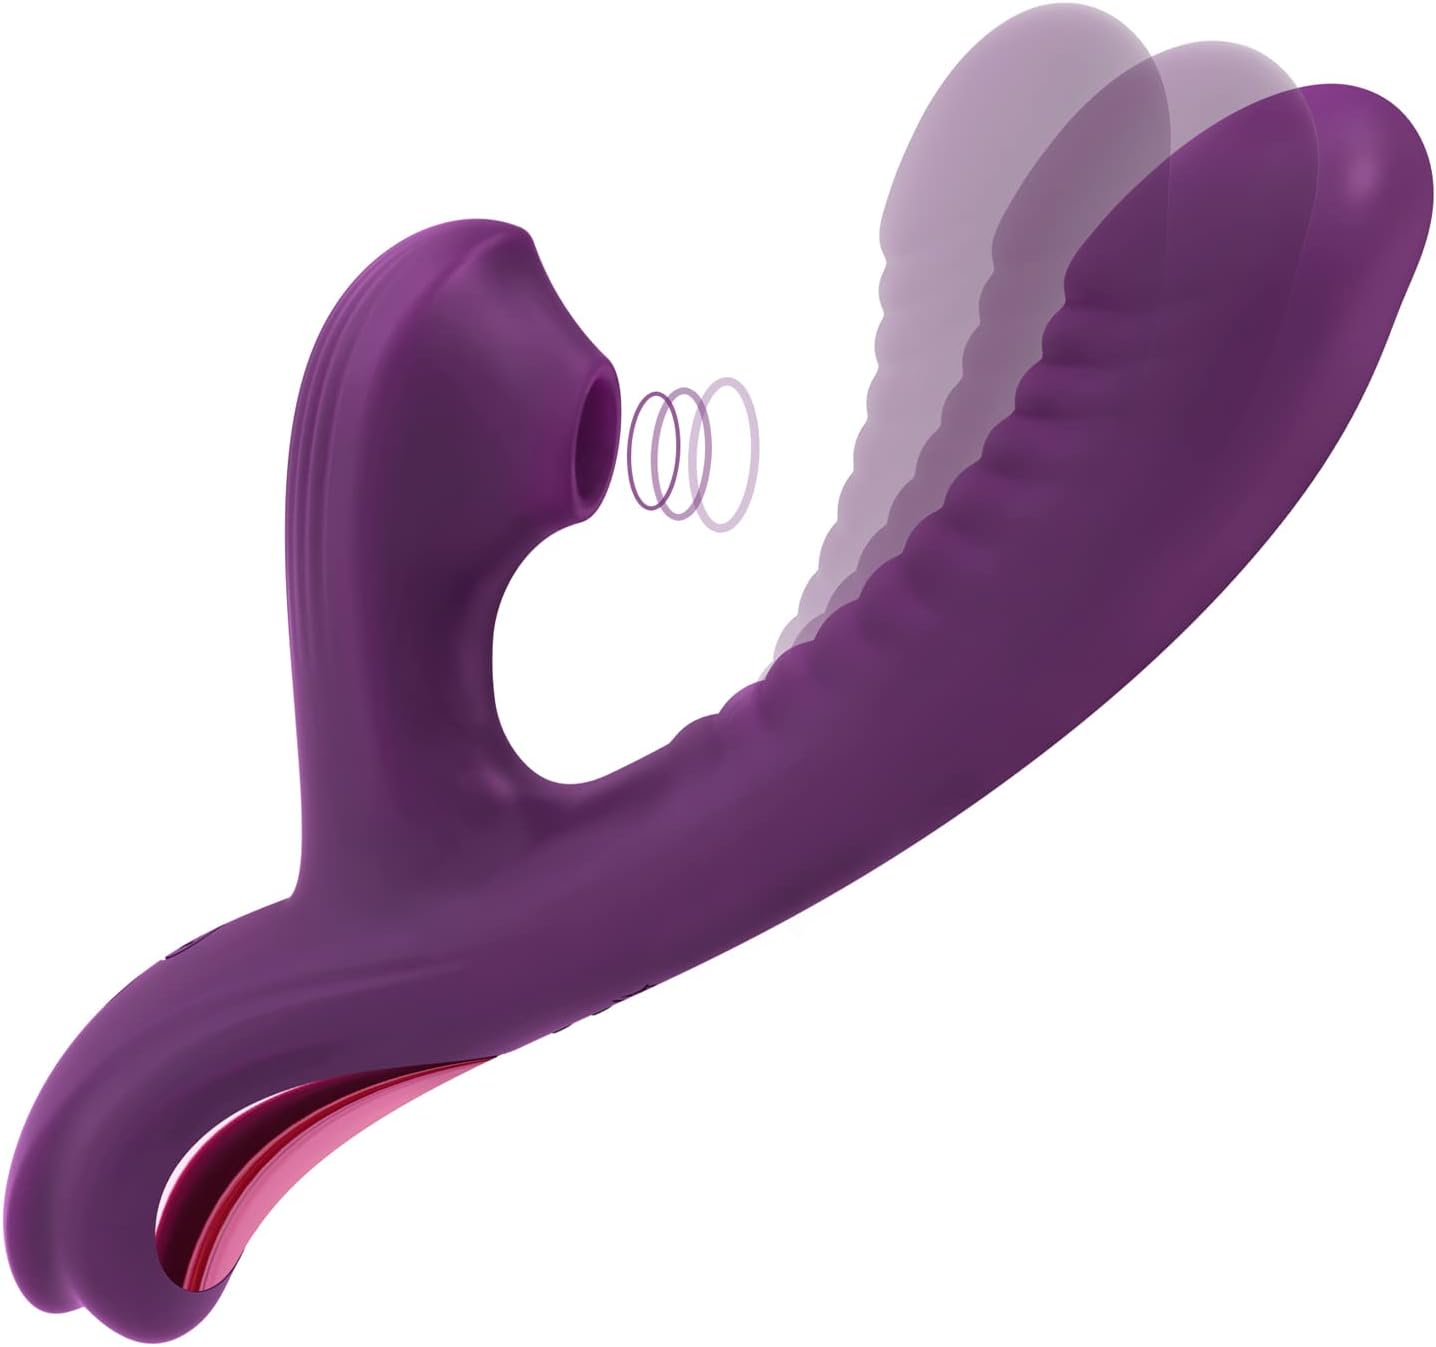 7 Types of Vibrators To Help You Find Your Pleasure in 2023 pic